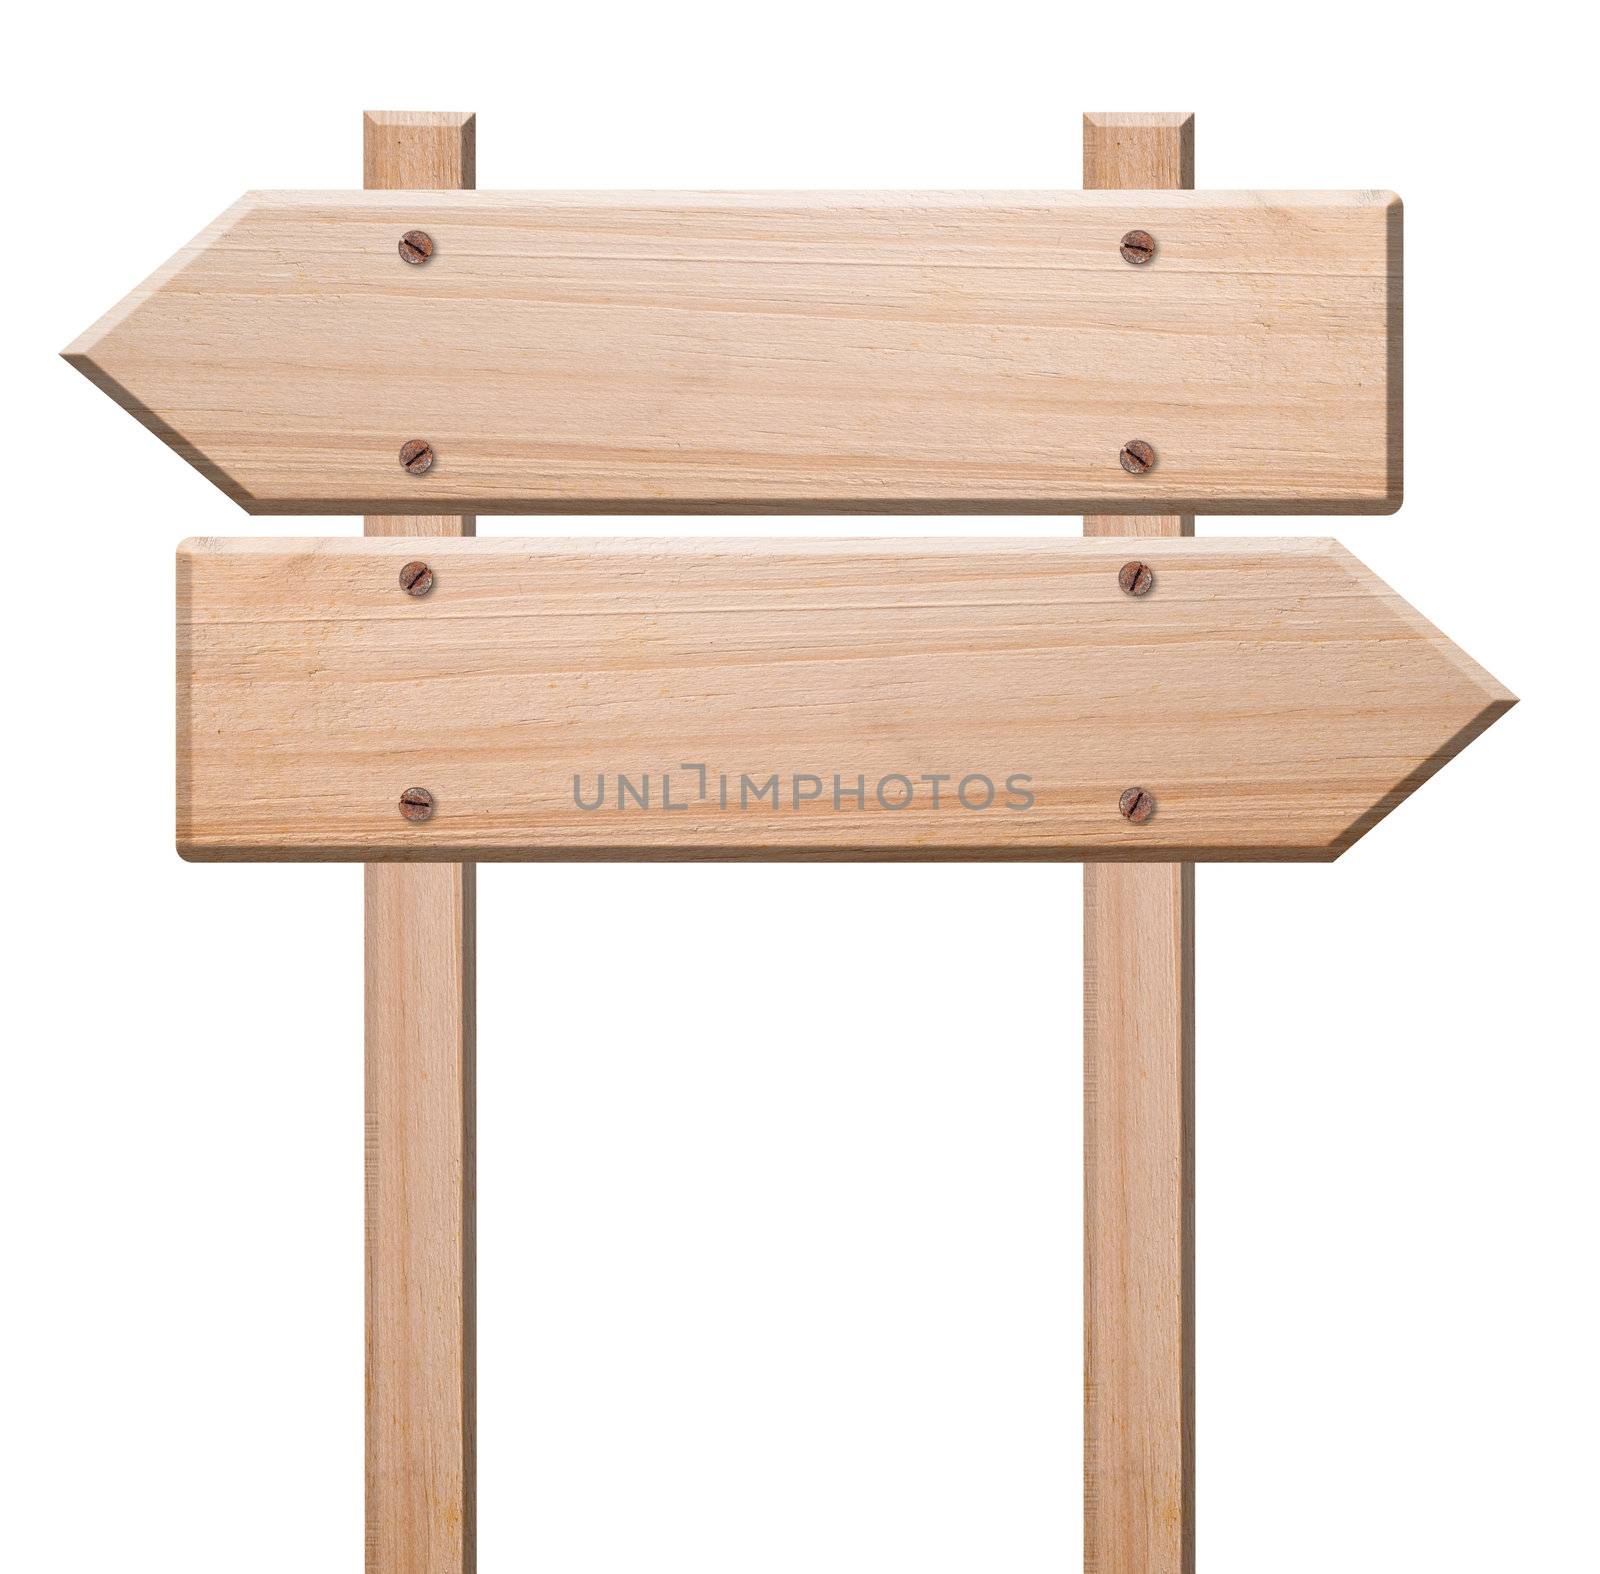 Arrow signs made out of wood isolated, with clipping path.